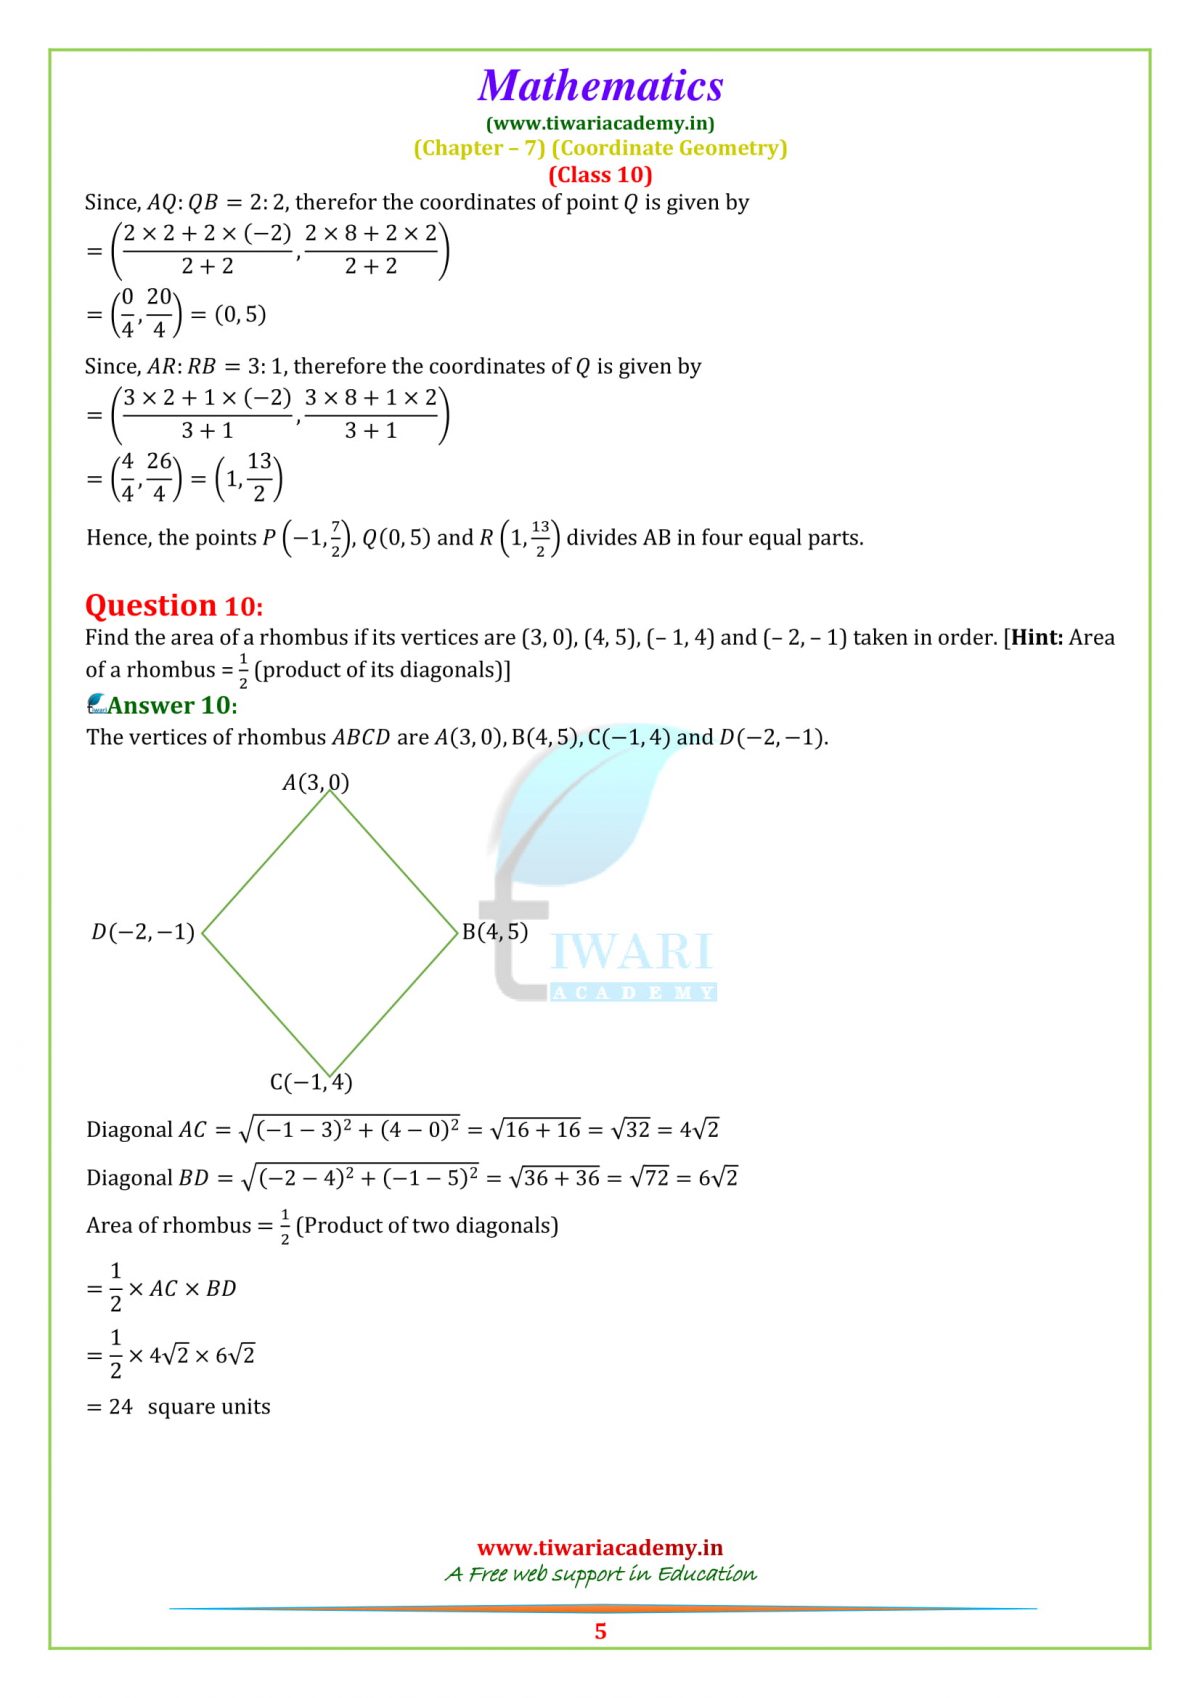 case study questions for class 10 maths chapter 7